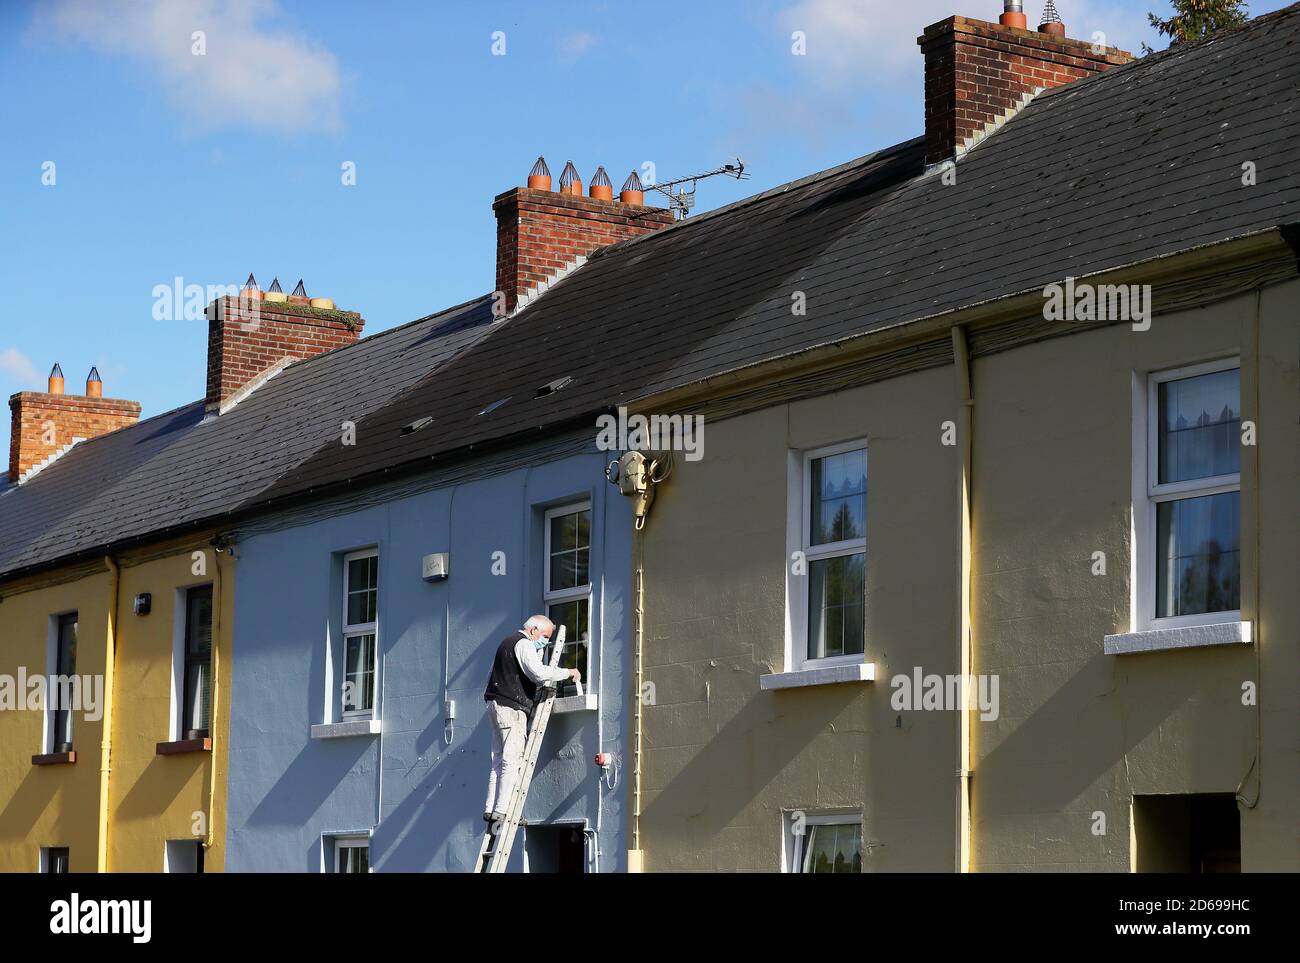 A man wearing a face mask paints the front of a house on Main street, Co. Cavan, as counties Donegal, Cavan and Monaghan prepare to move to Level 4 of Ireland's Covid-19 plan from midnight tonight. Stock Photo